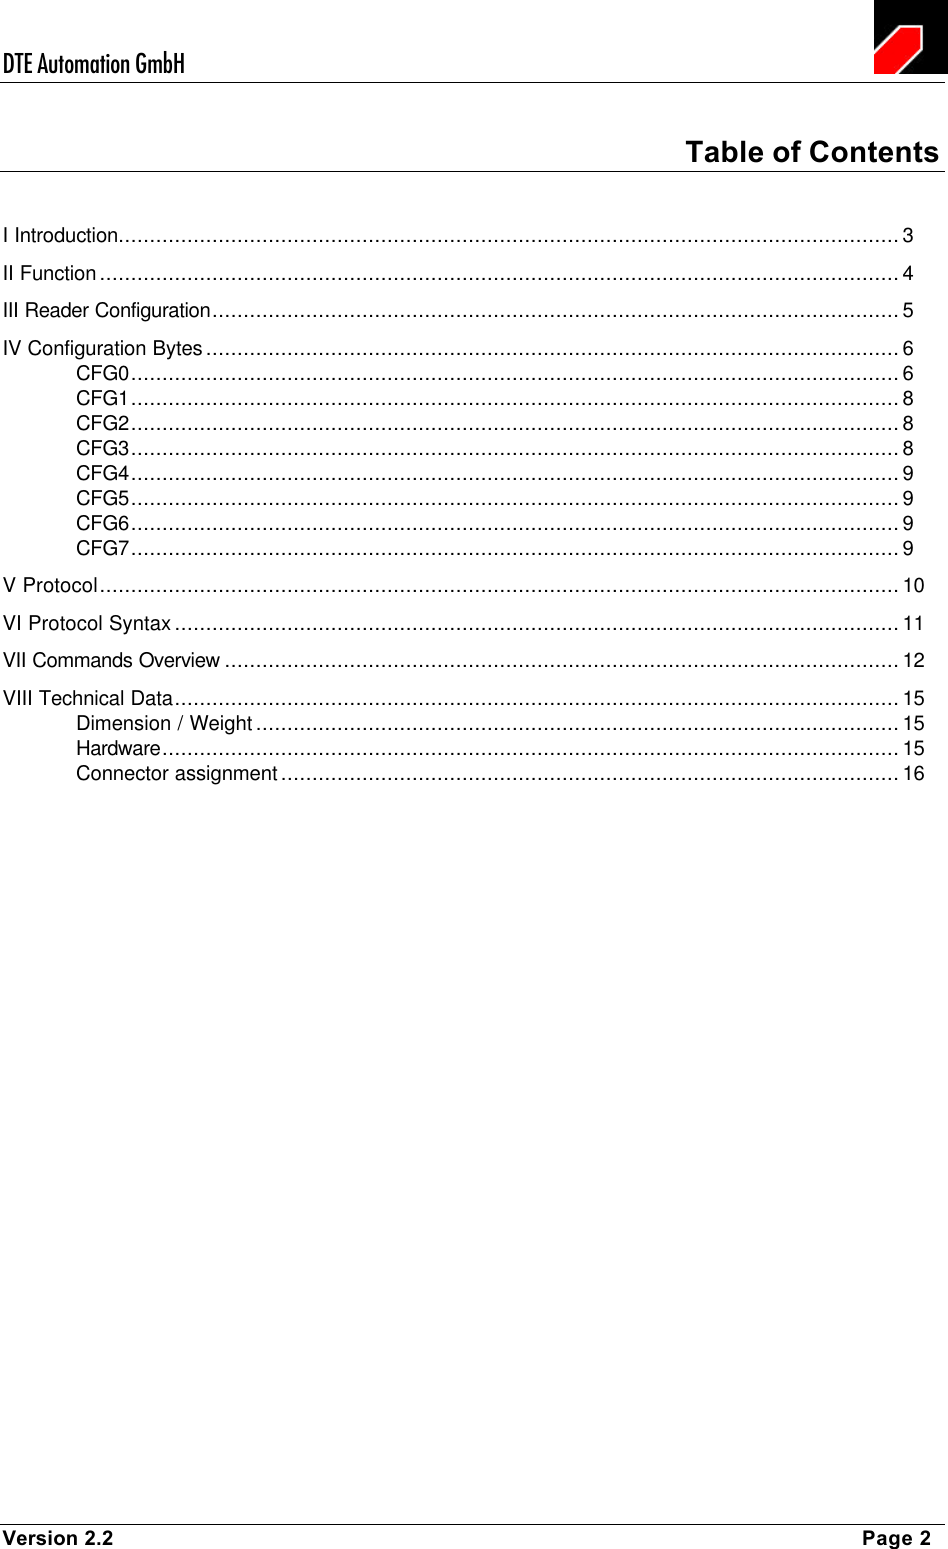 DTE Automation GmbH    Version 2.2    Page 2 Table of Contents I Introduction.............................................................................................................................3 II Function................................................................................................................................4 III Reader Configuration..............................................................................................................5 IV Configuration Bytes...............................................................................................................6 CFG0...........................................................................................................................6 CFG1...........................................................................................................................8 CFG2...........................................................................................................................8 CFG3...........................................................................................................................8 CFG4...........................................................................................................................9 CFG5...........................................................................................................................9 CFG6...........................................................................................................................9 CFG7...........................................................................................................................9 V Protocol................................................................................................................................10 VI Protocol Syntax....................................................................................................................11 VII Commands Overview ............................................................................................................12 VIII Technical Data....................................................................................................................15 Dimension / Weight.......................................................................................................15 Hardware......................................................................................................................15 Connector assignment...................................................................................................16 